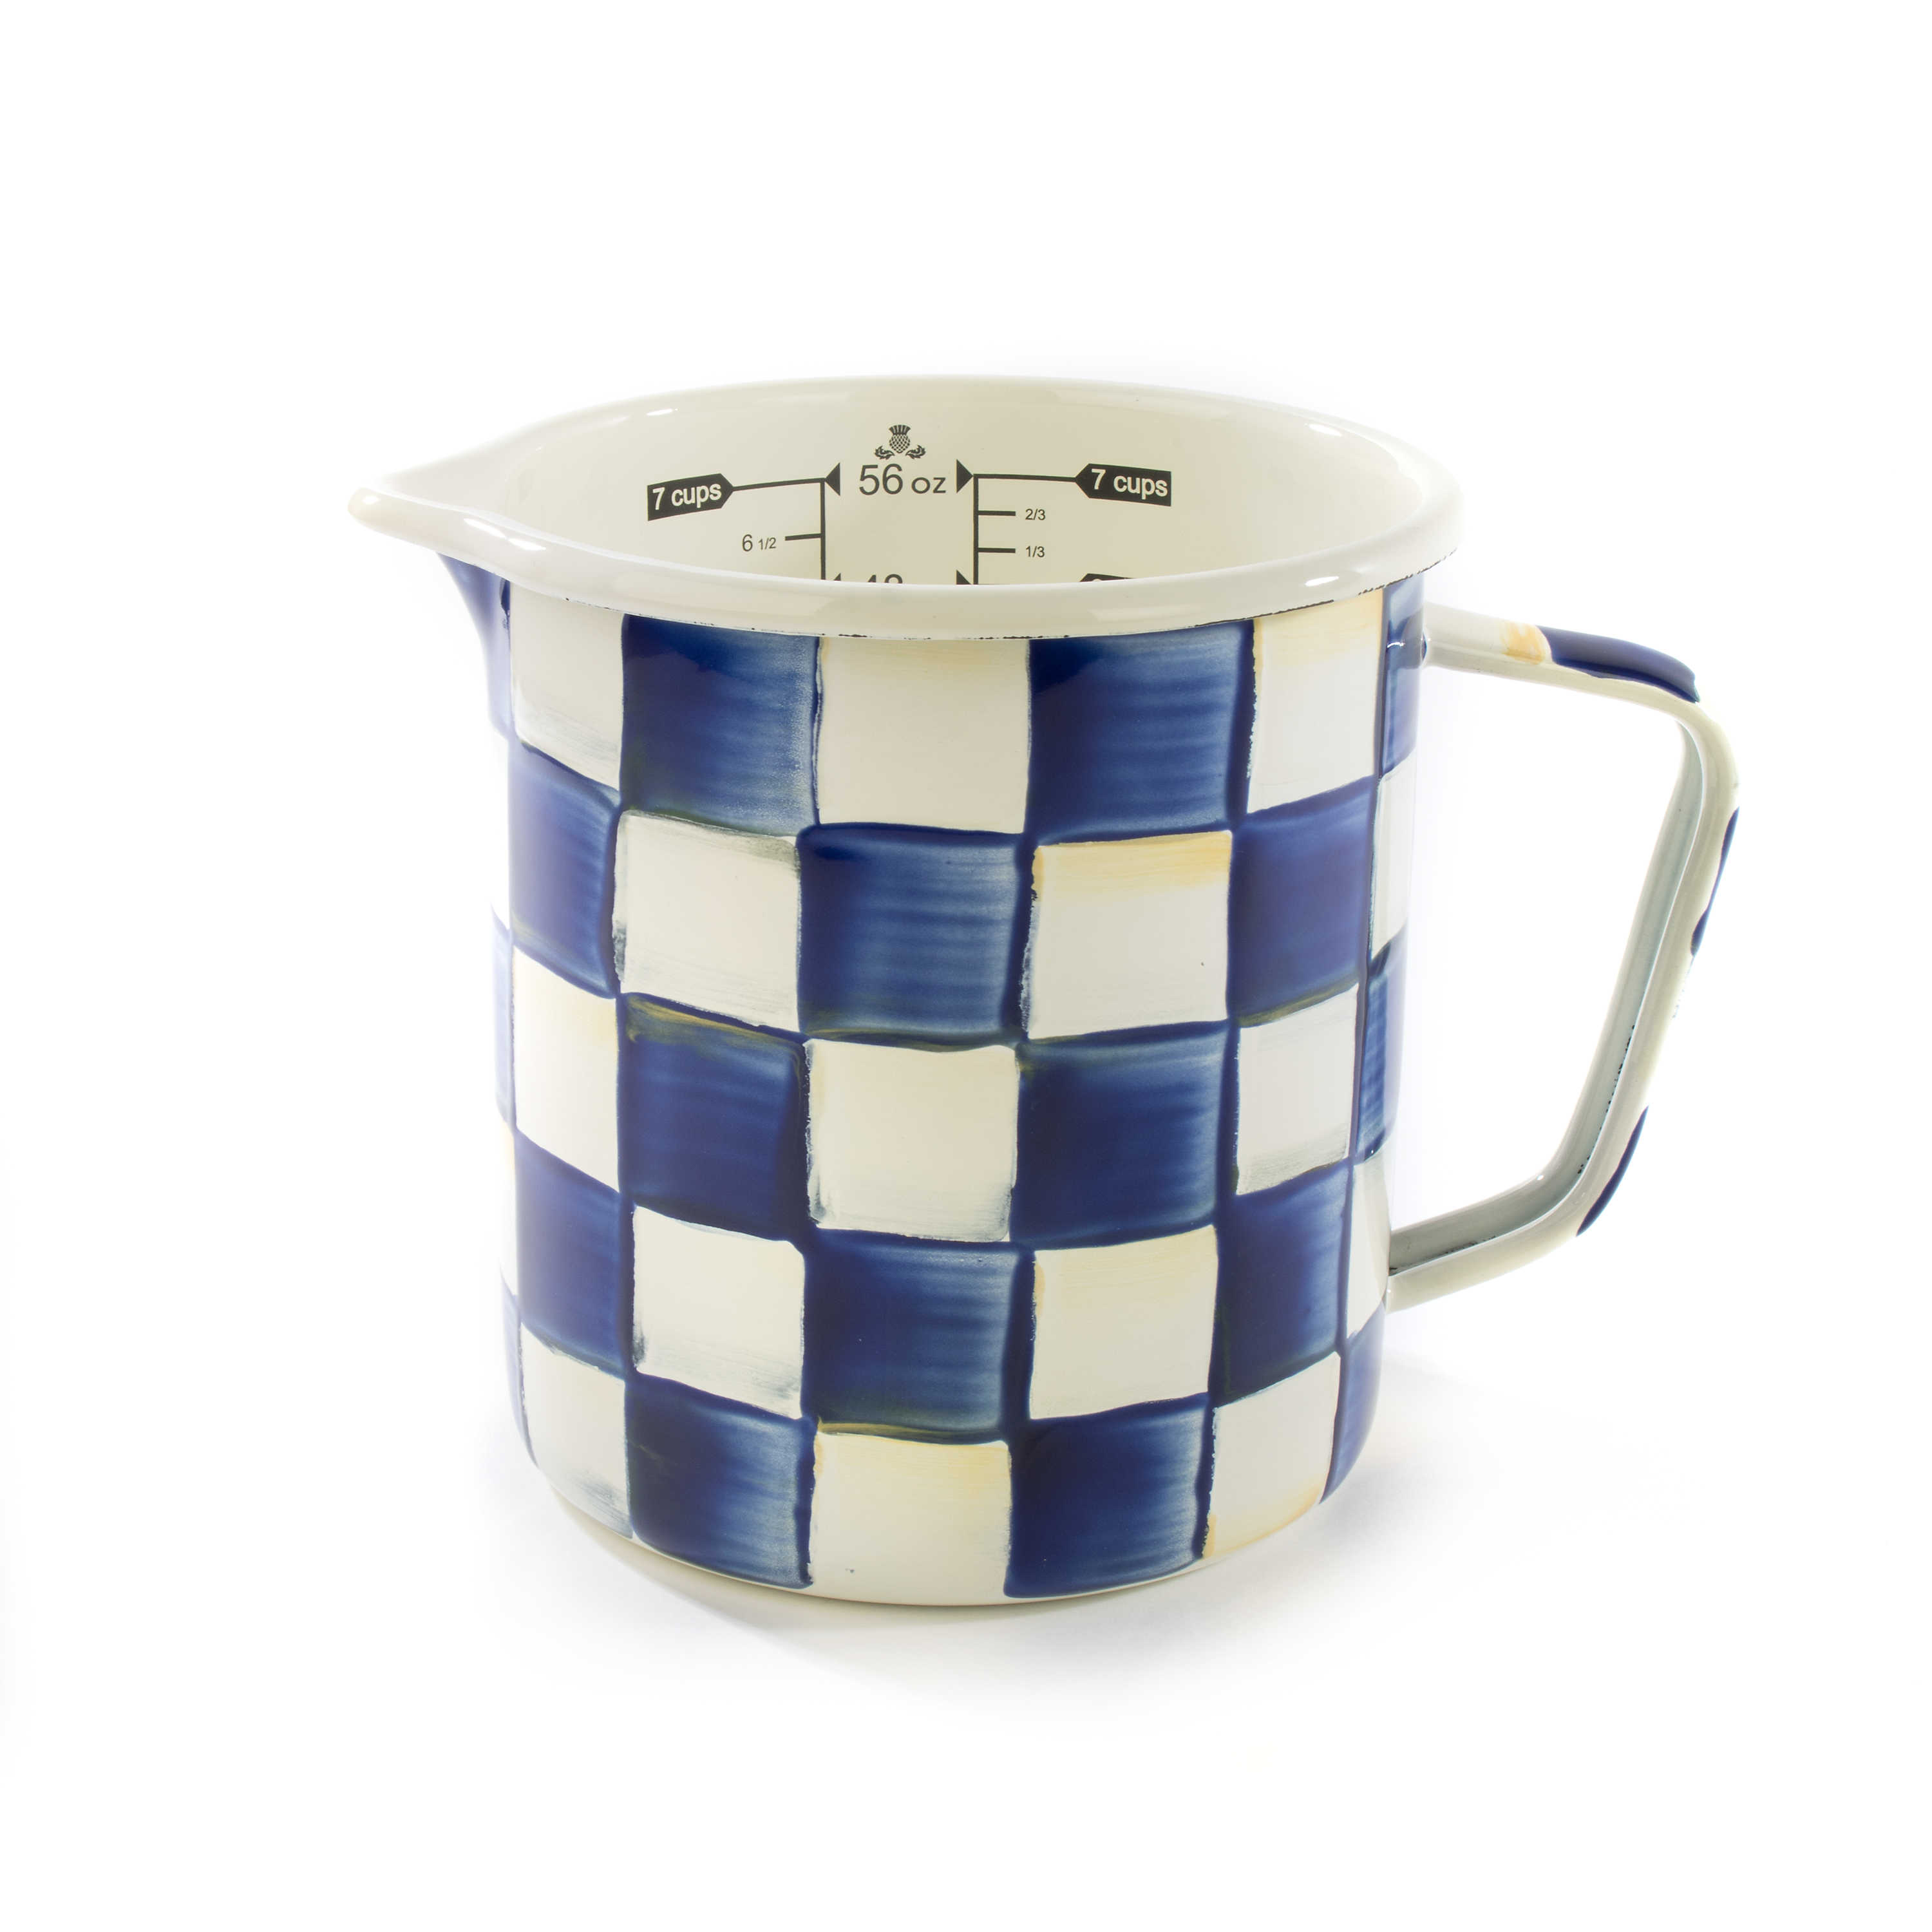 Royal Check 7 Cup Measuring Cup mackenzie-childs Panama 0